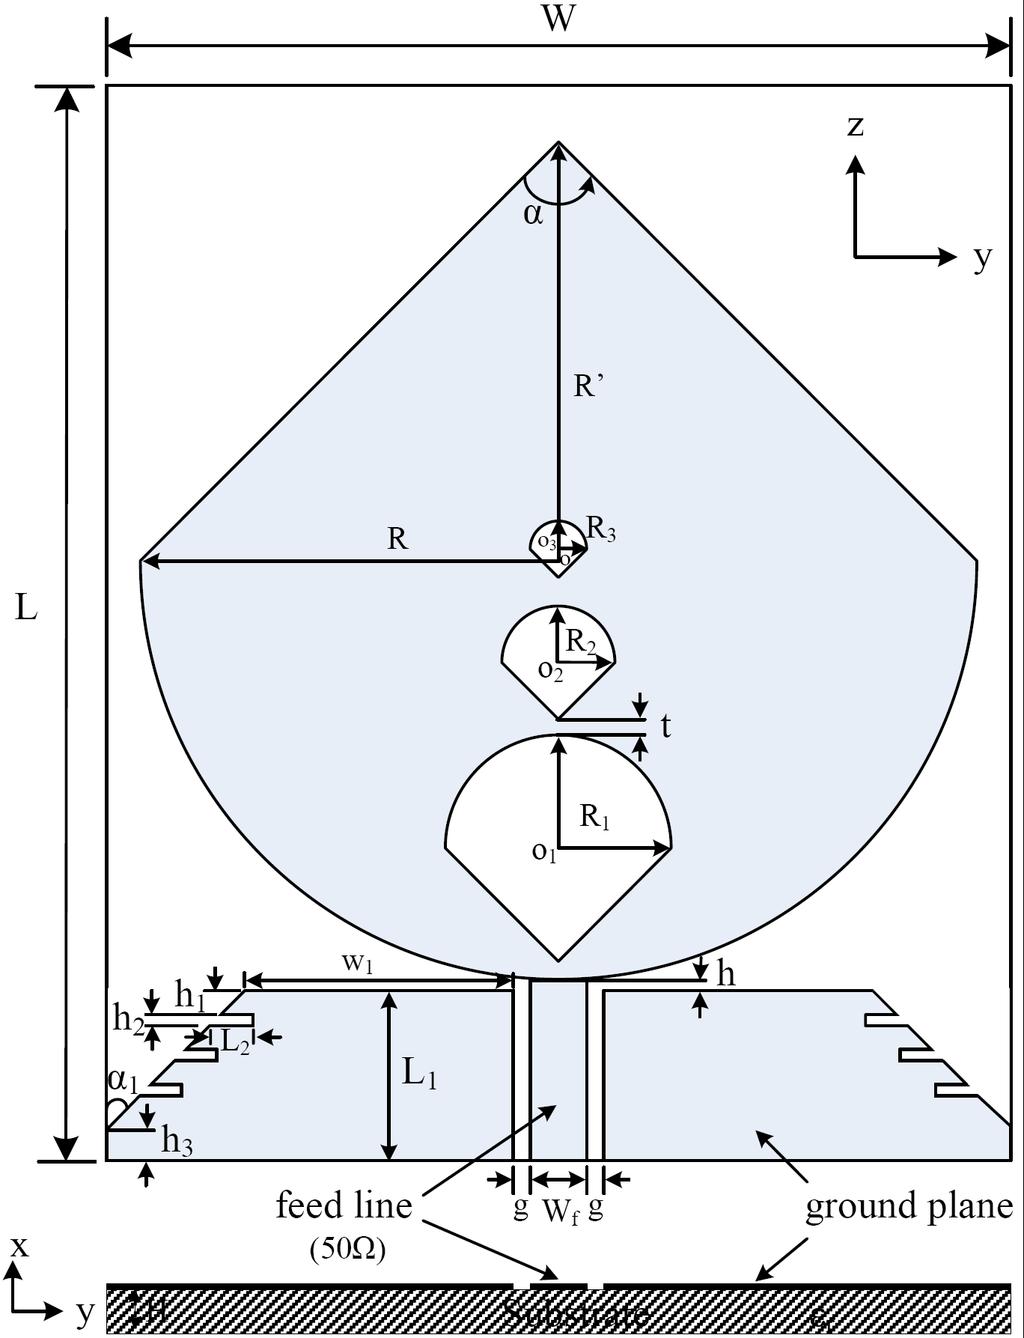 Progress In Electromagnetics Research C, Vol. 12, 2010 103 angle α, R, R, and other parameters of the antenna in Figure 1 can be varied to obtain desired characteristics. Figure 1. Geometry and dimensions of the PICA: L = 95.